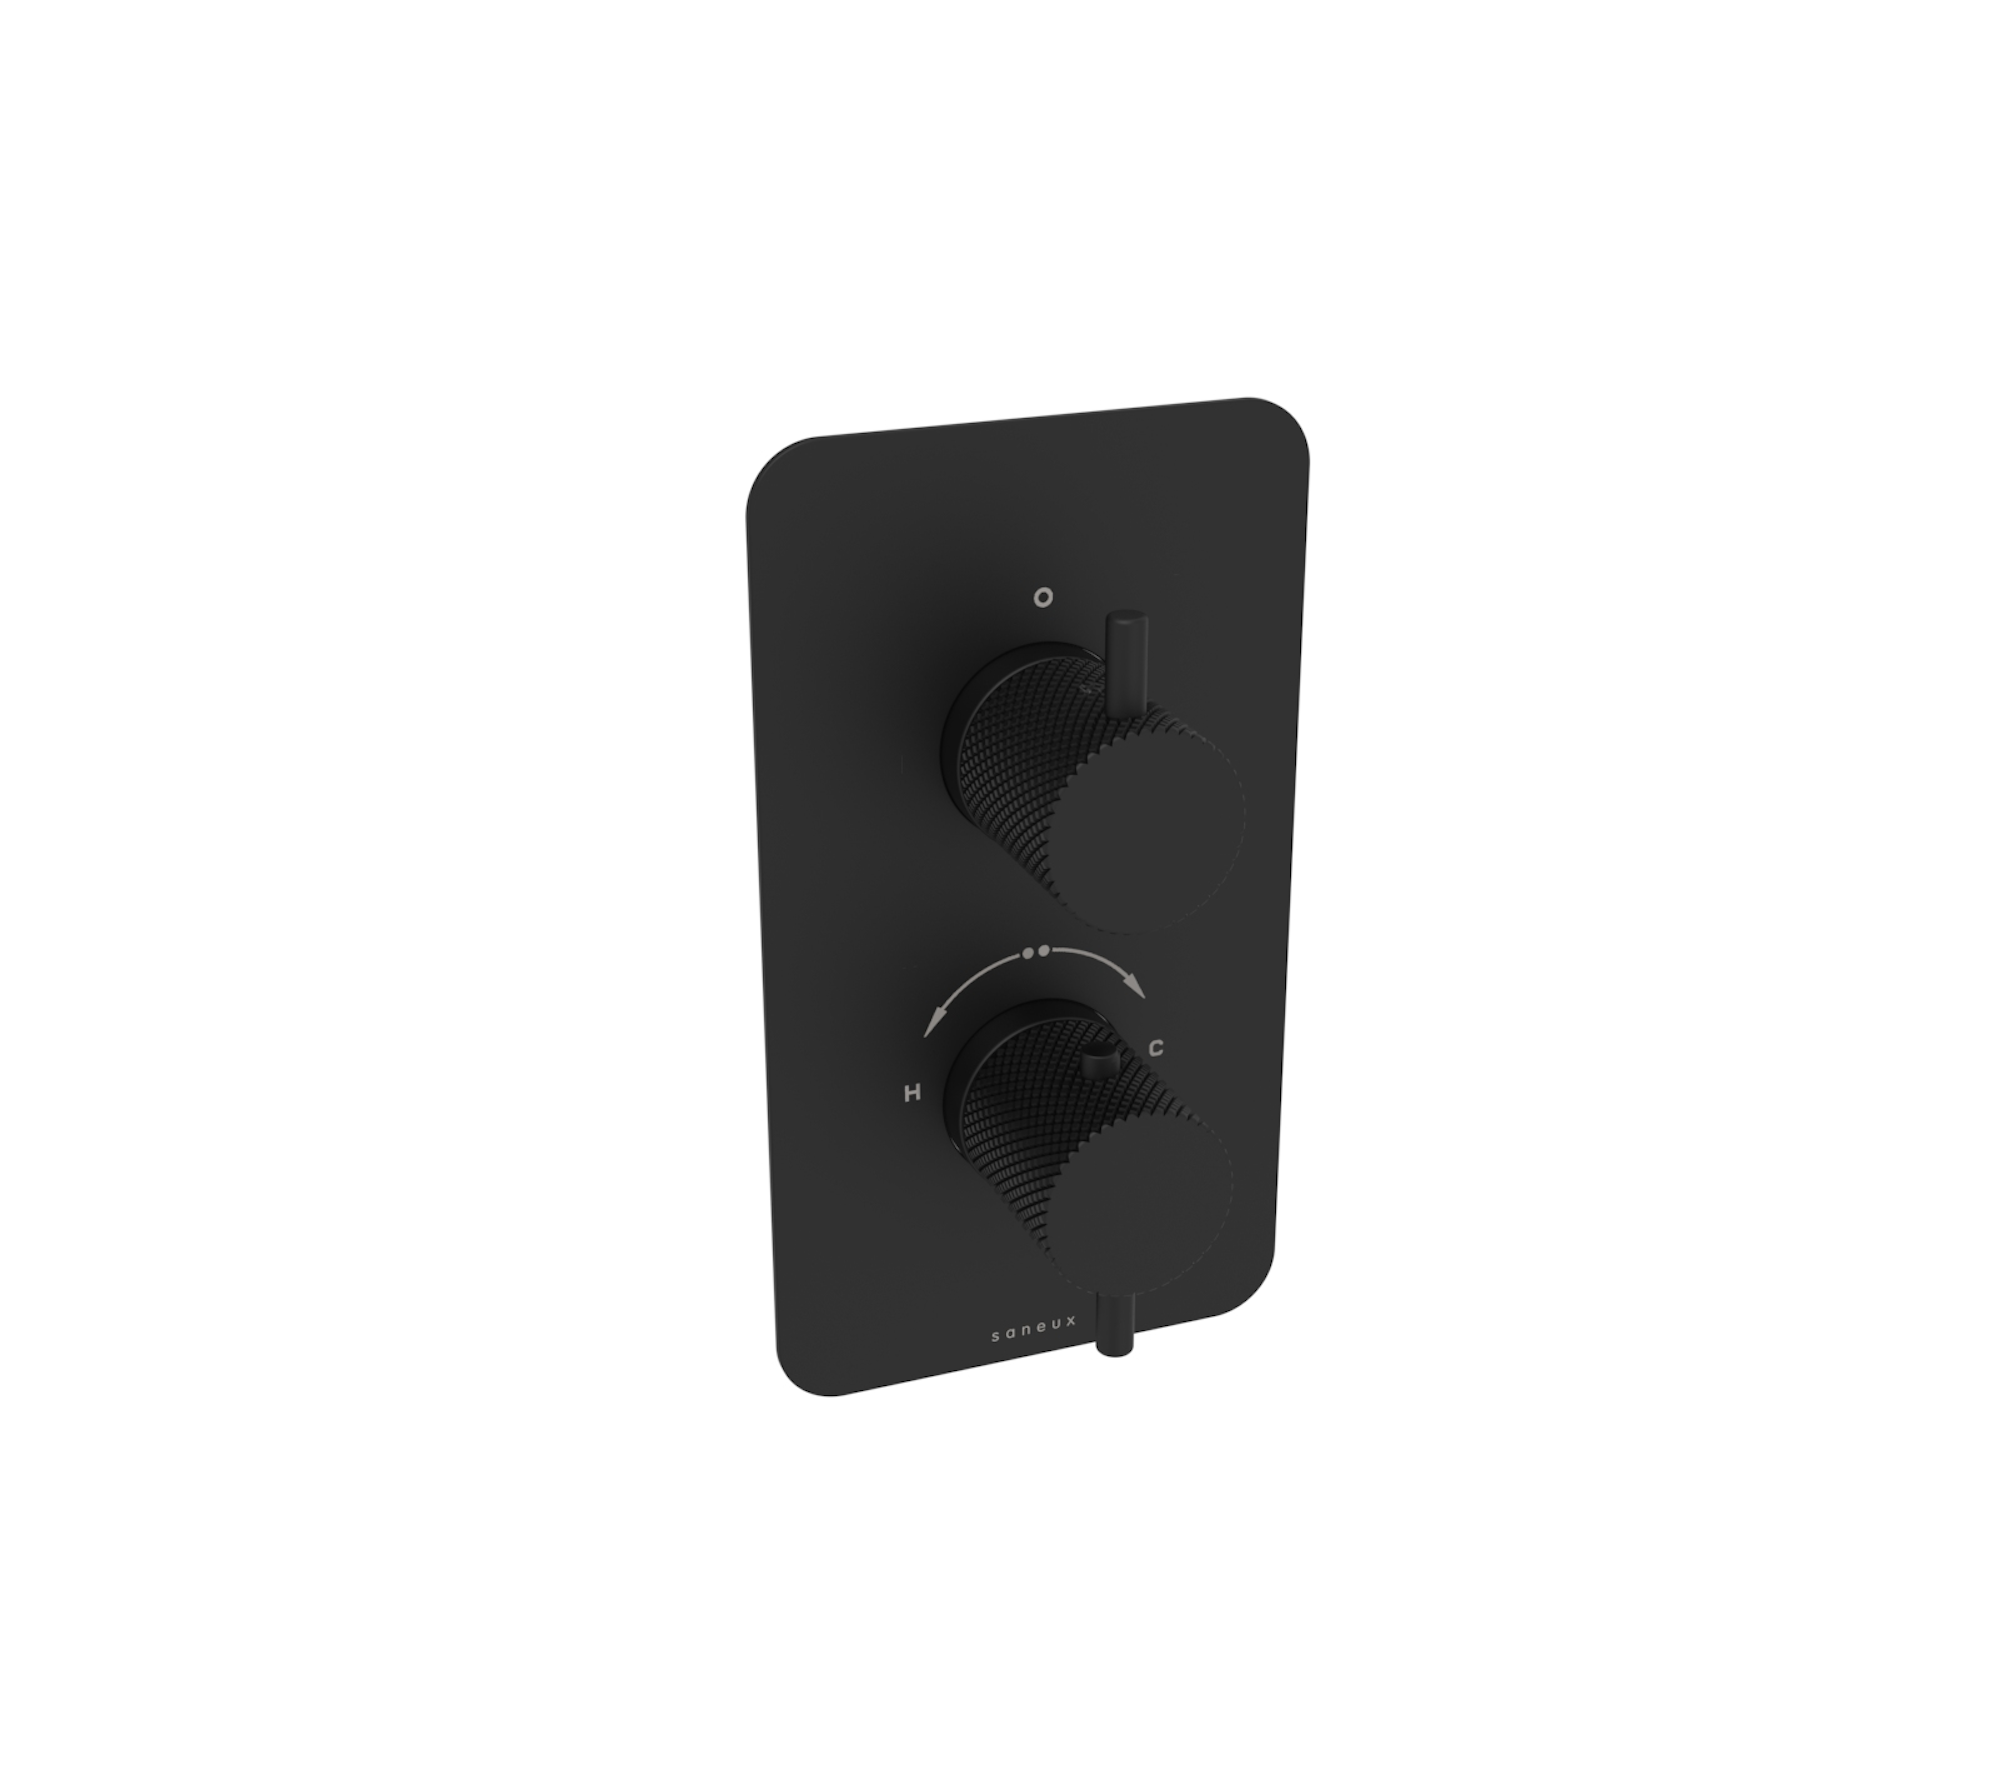 COS 1 way thermostatic shower valve kit with knurled handles - Matte Black